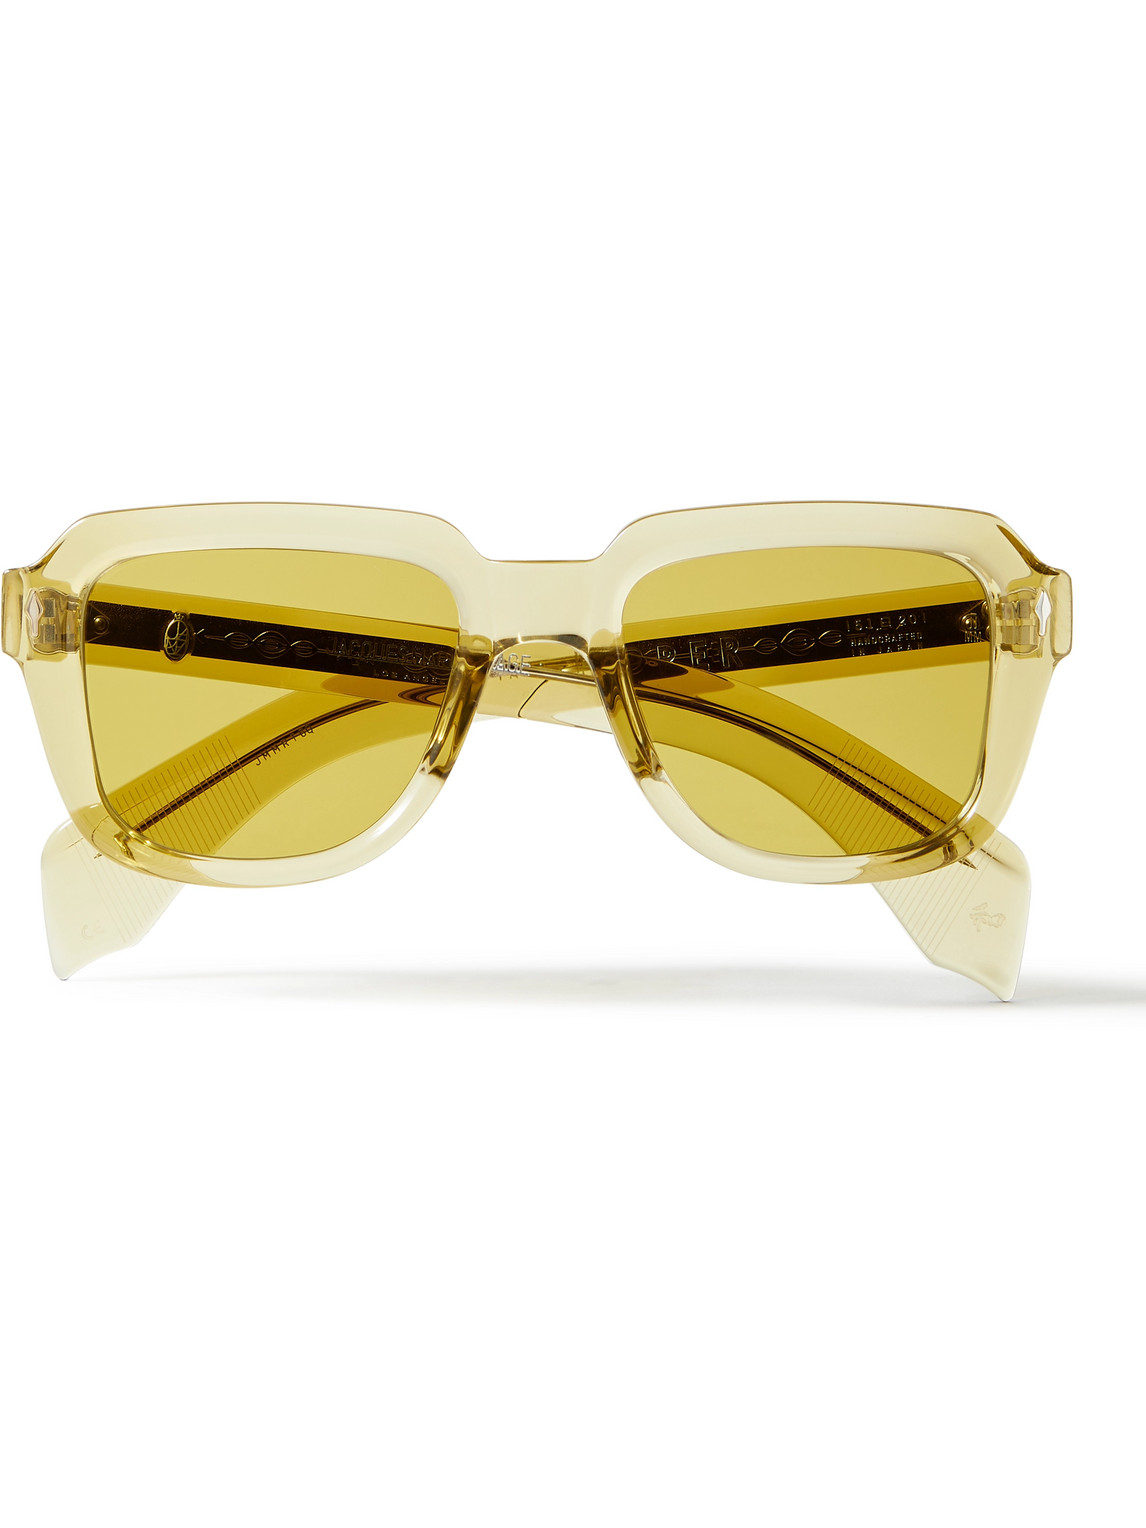 Jacques Marie Mage Hopper Goods Taos Square-frame Acetate Sunglasses In Green